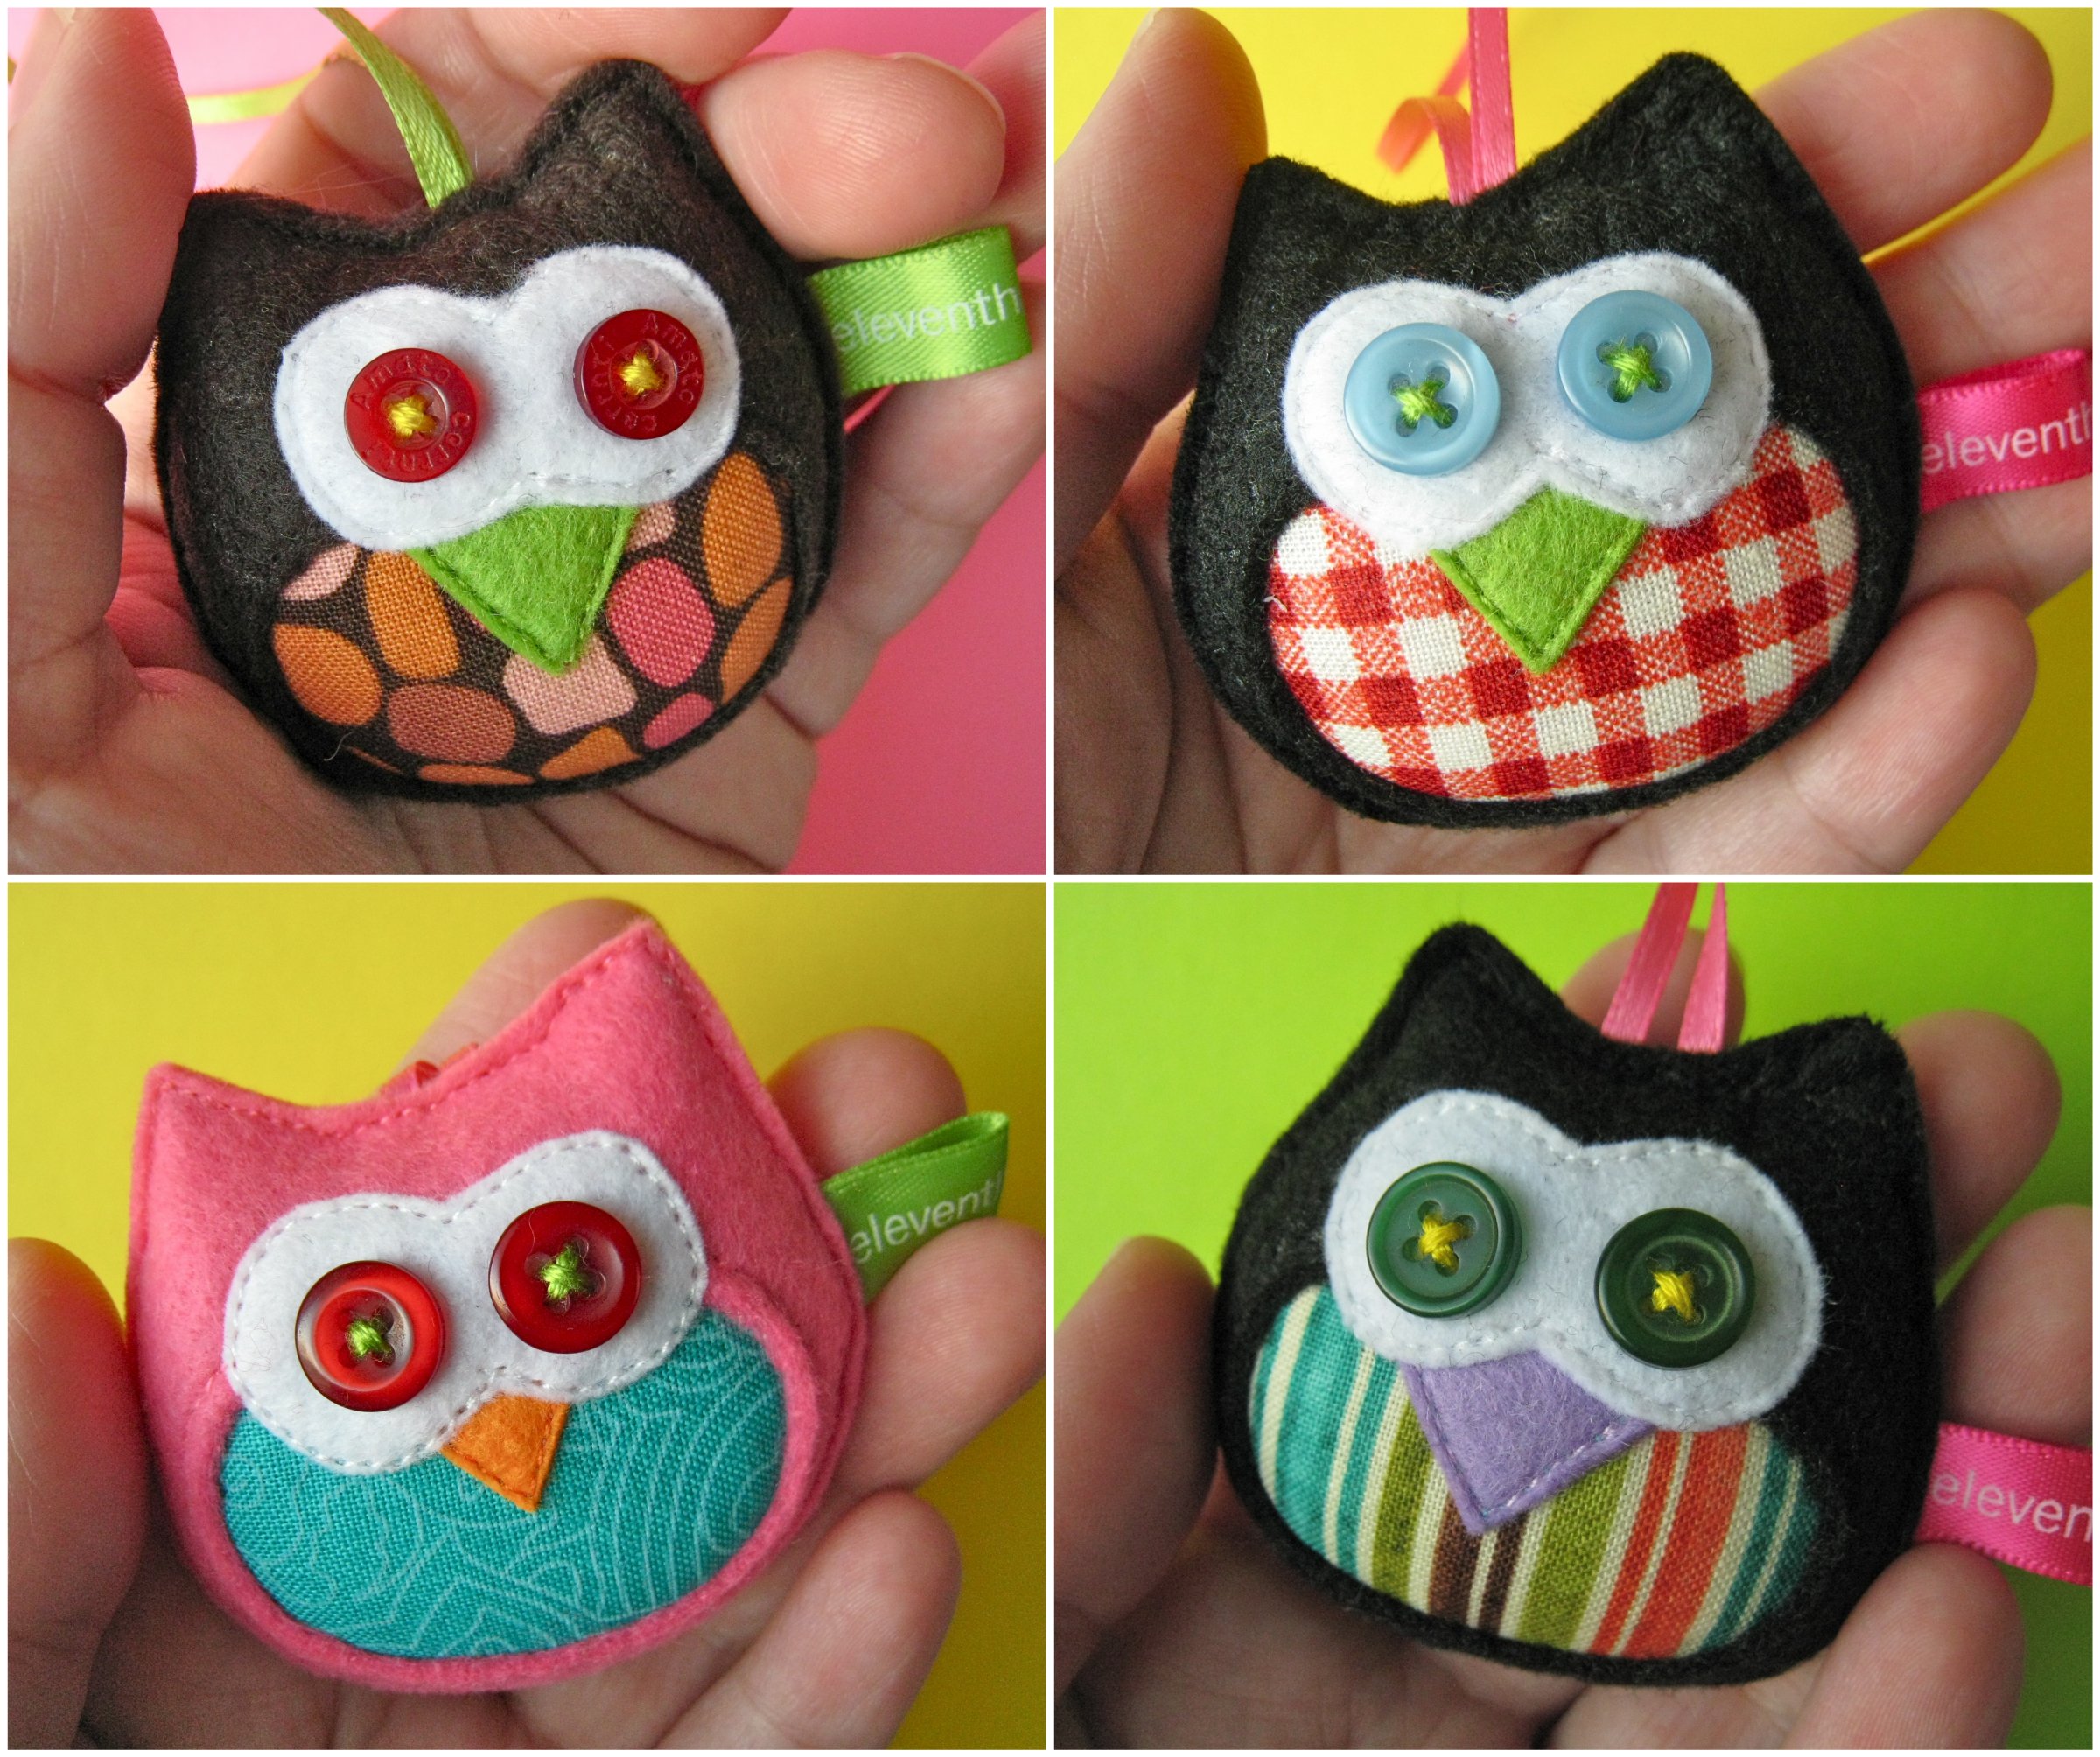 The tiny leftover owls